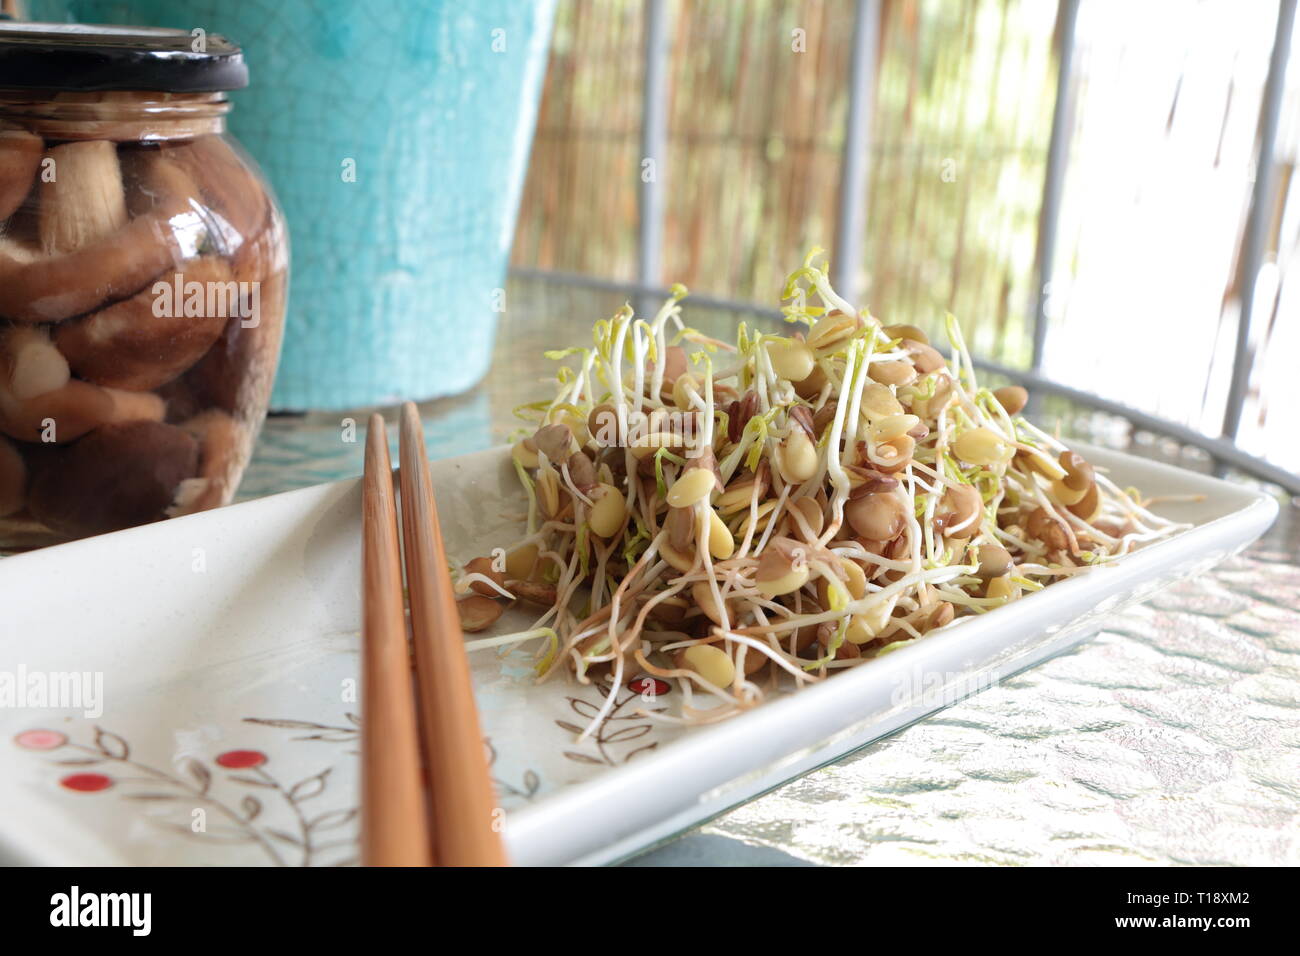 Lentil sprouts salad on plate with chopsticks Stock Photo